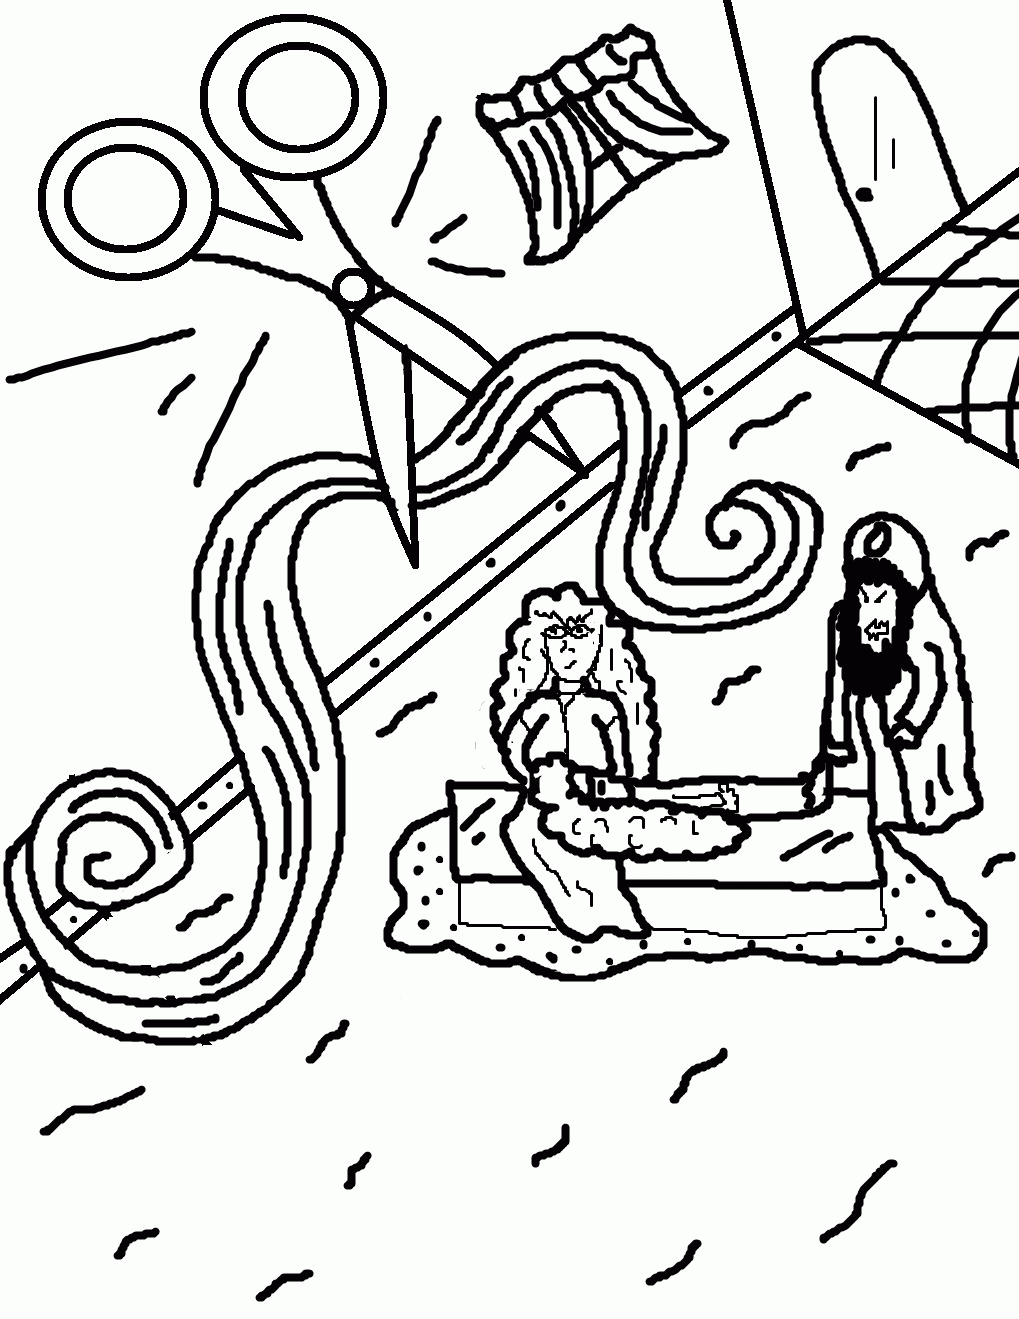 Samson and Delilah Coloring Pages